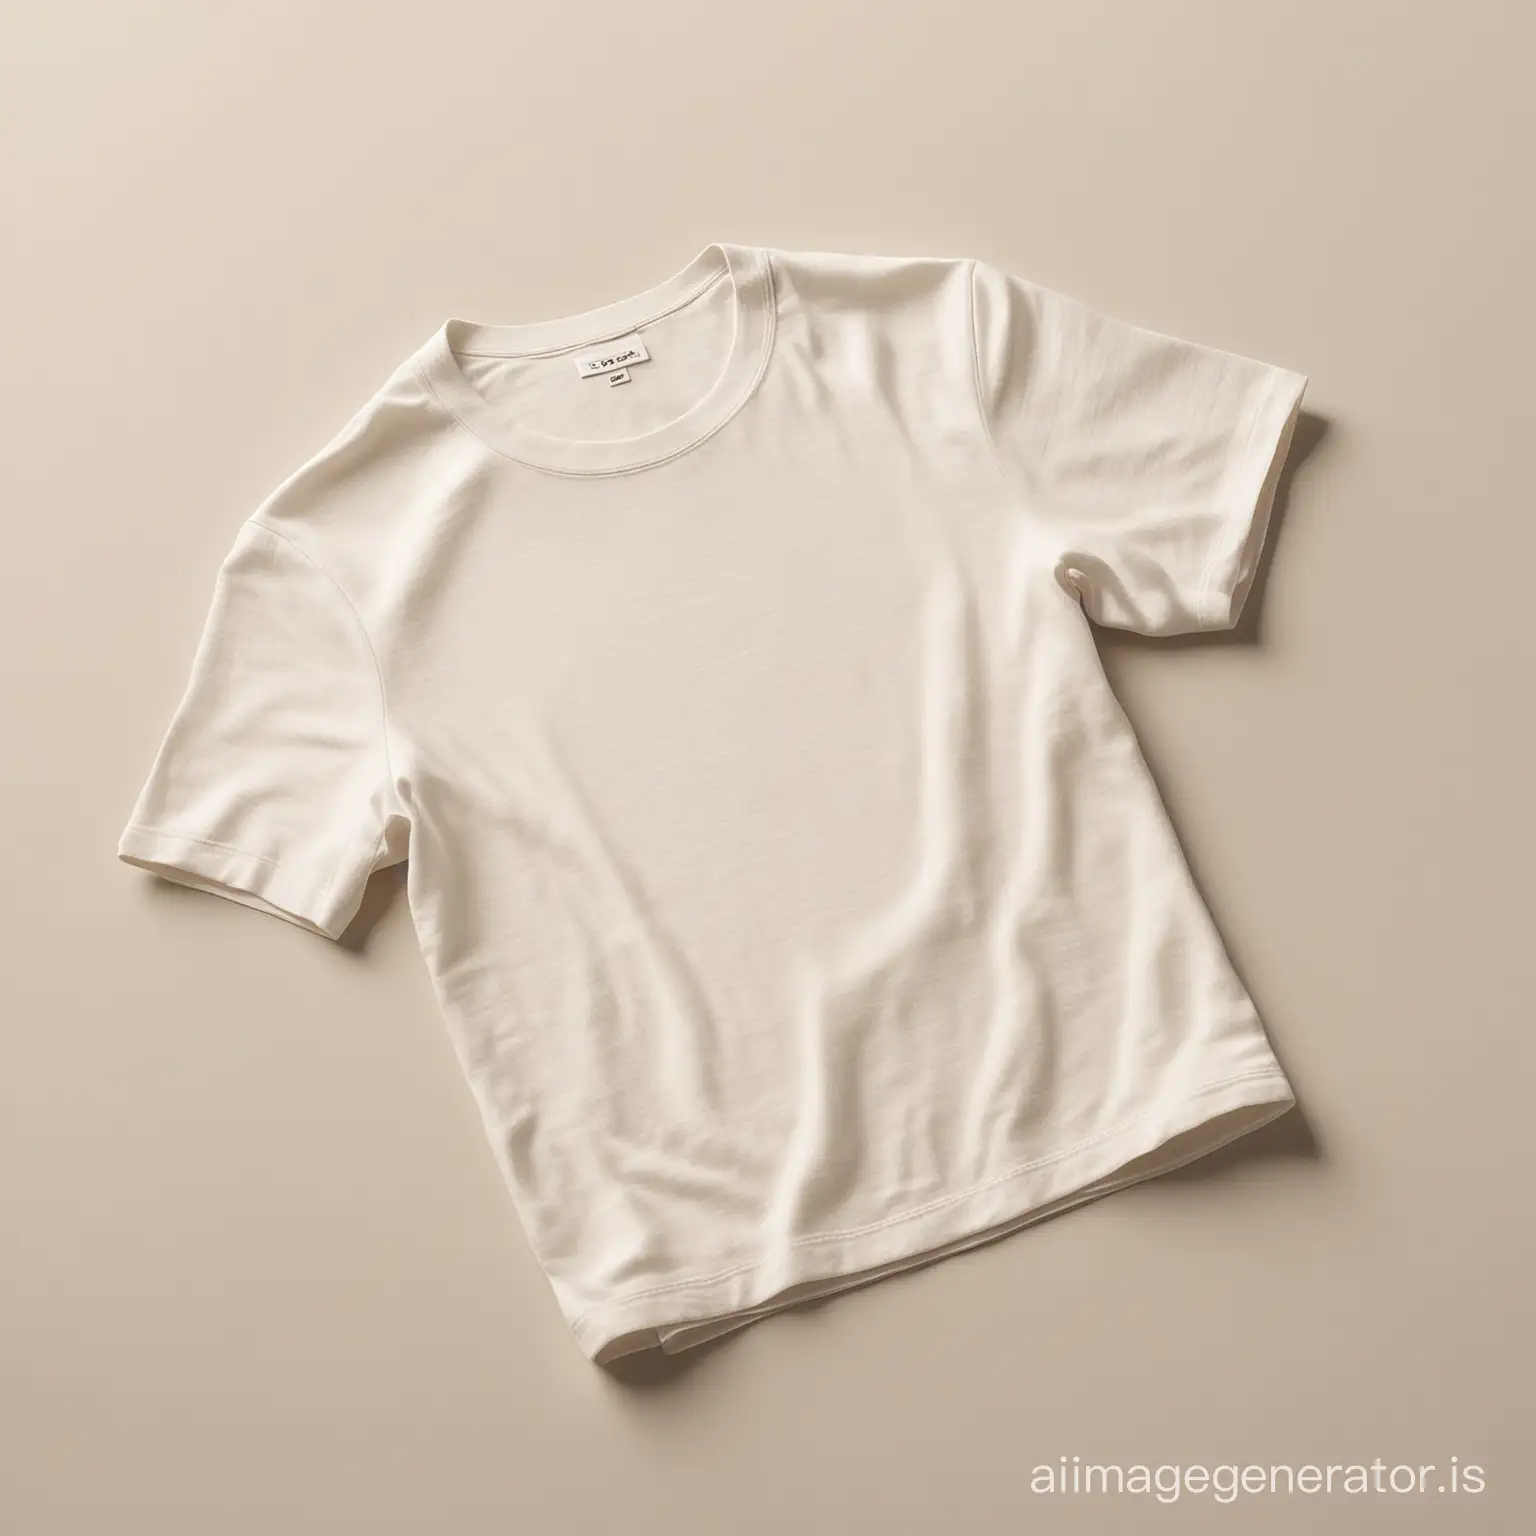 Luxurious-Ivory-TShirt-Cotton-in-Natural-Daylight-Studio-Setting